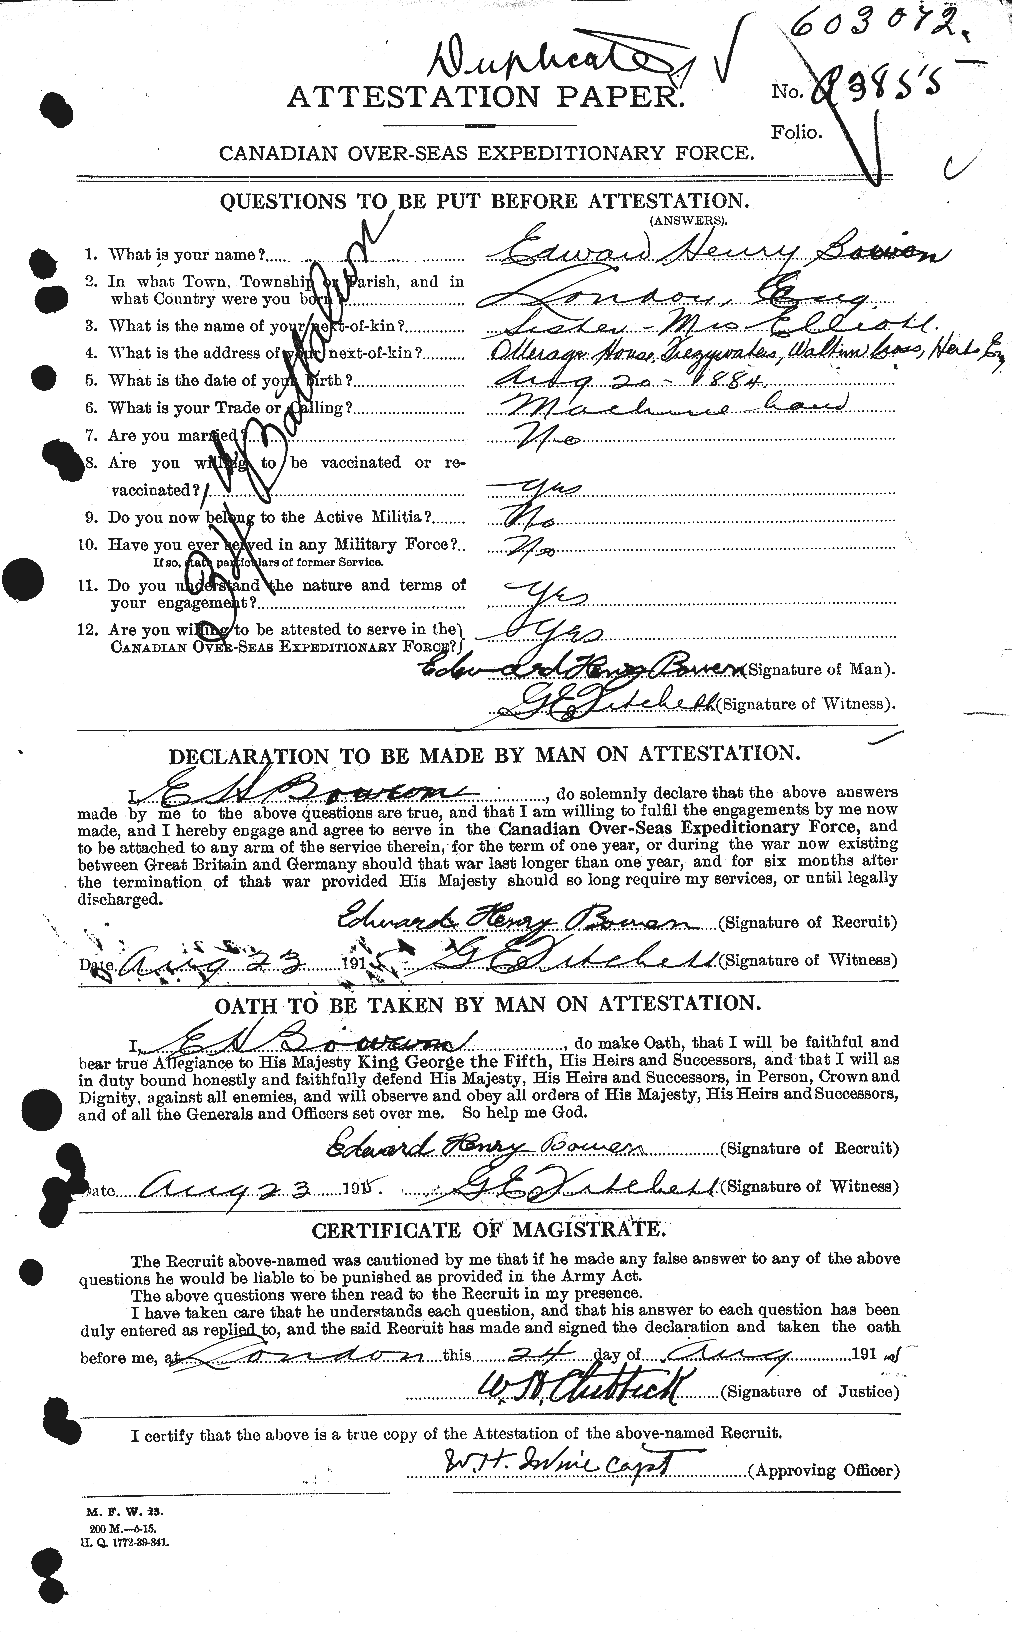 Personnel Records of the First World War - CEF 255381a